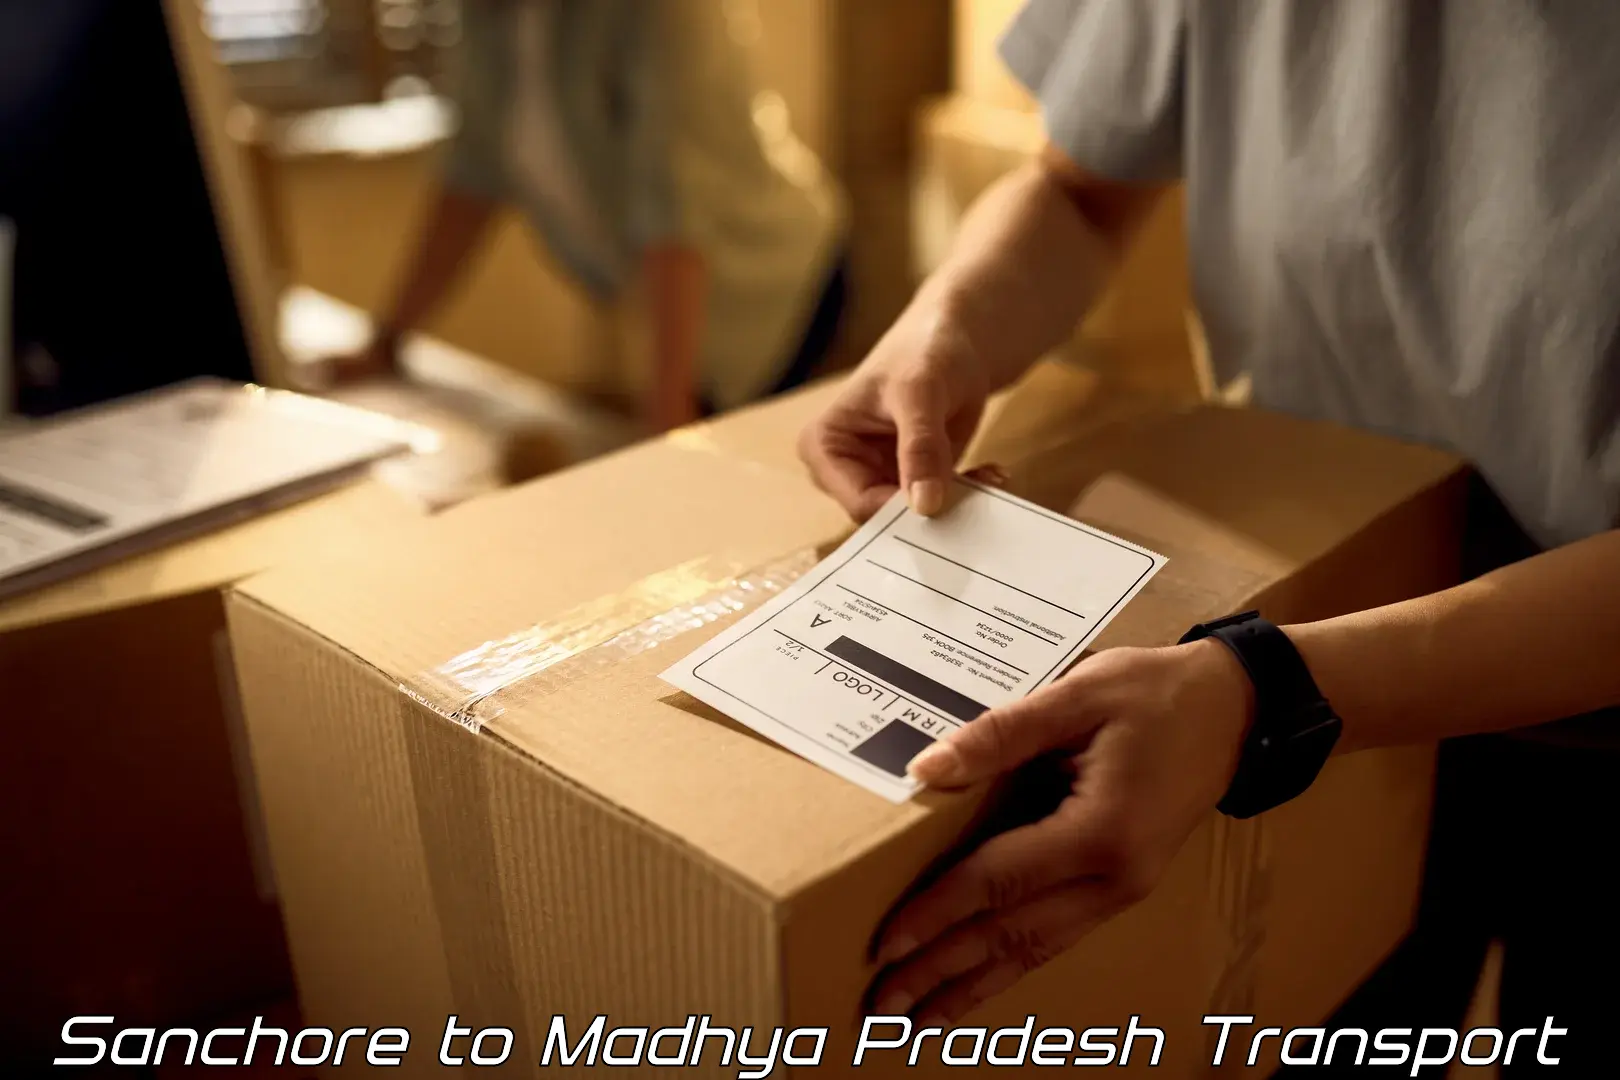 Express transport services Sanchore to Madwas